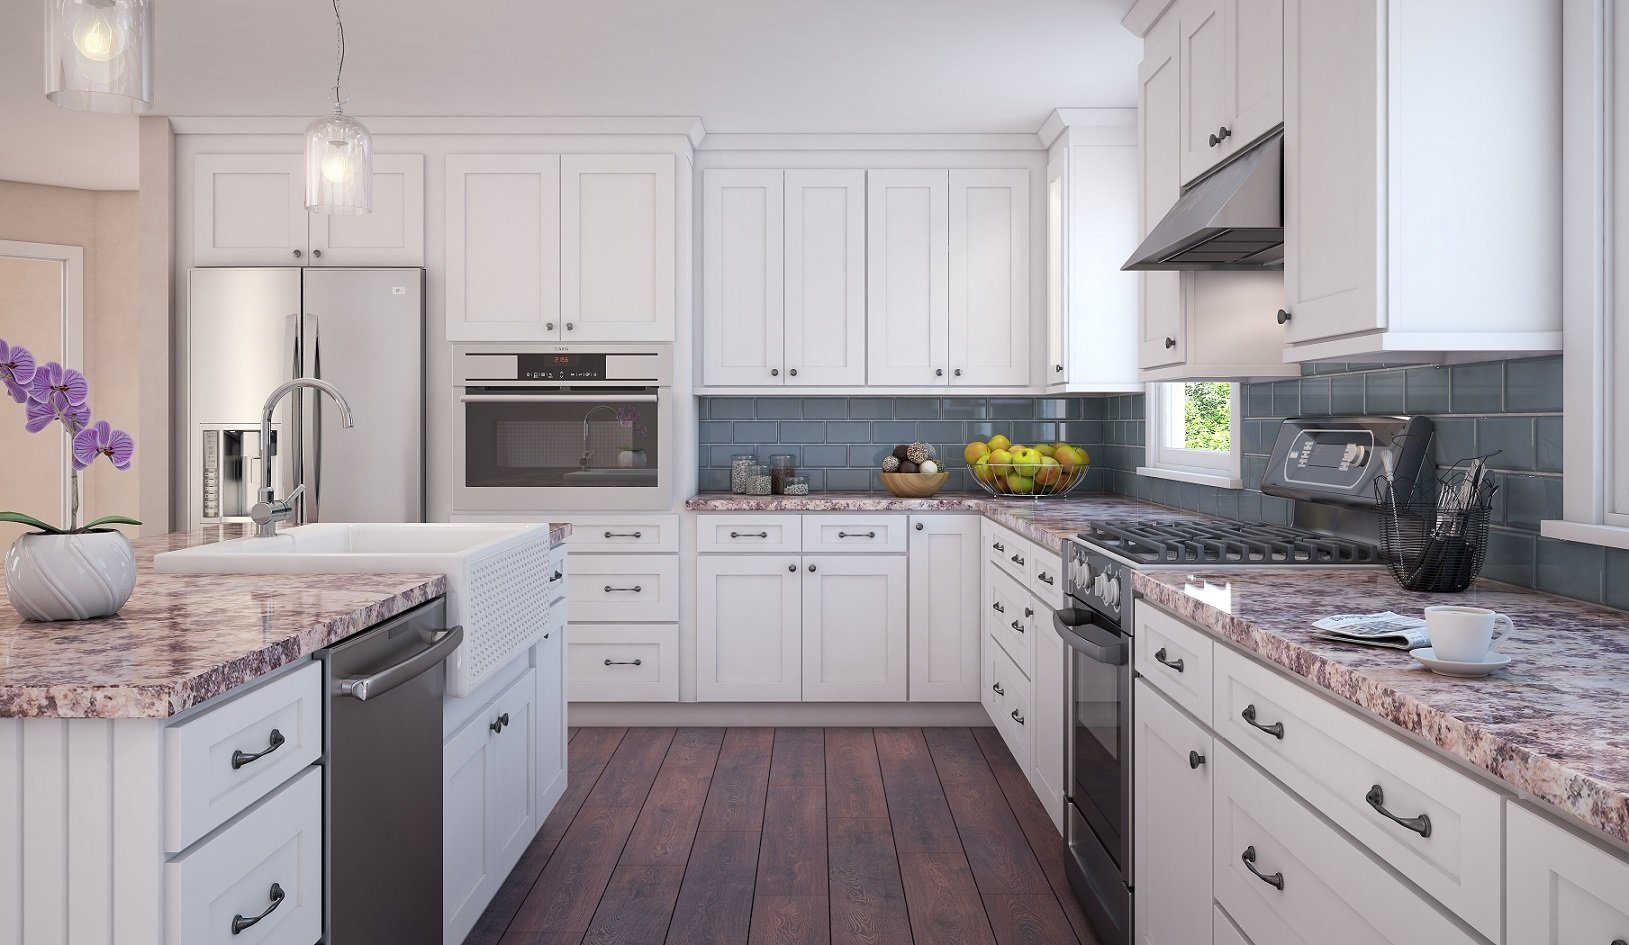 How To Protect Kitchen Backsplashes In 6 Simple Steps - The RTA Store